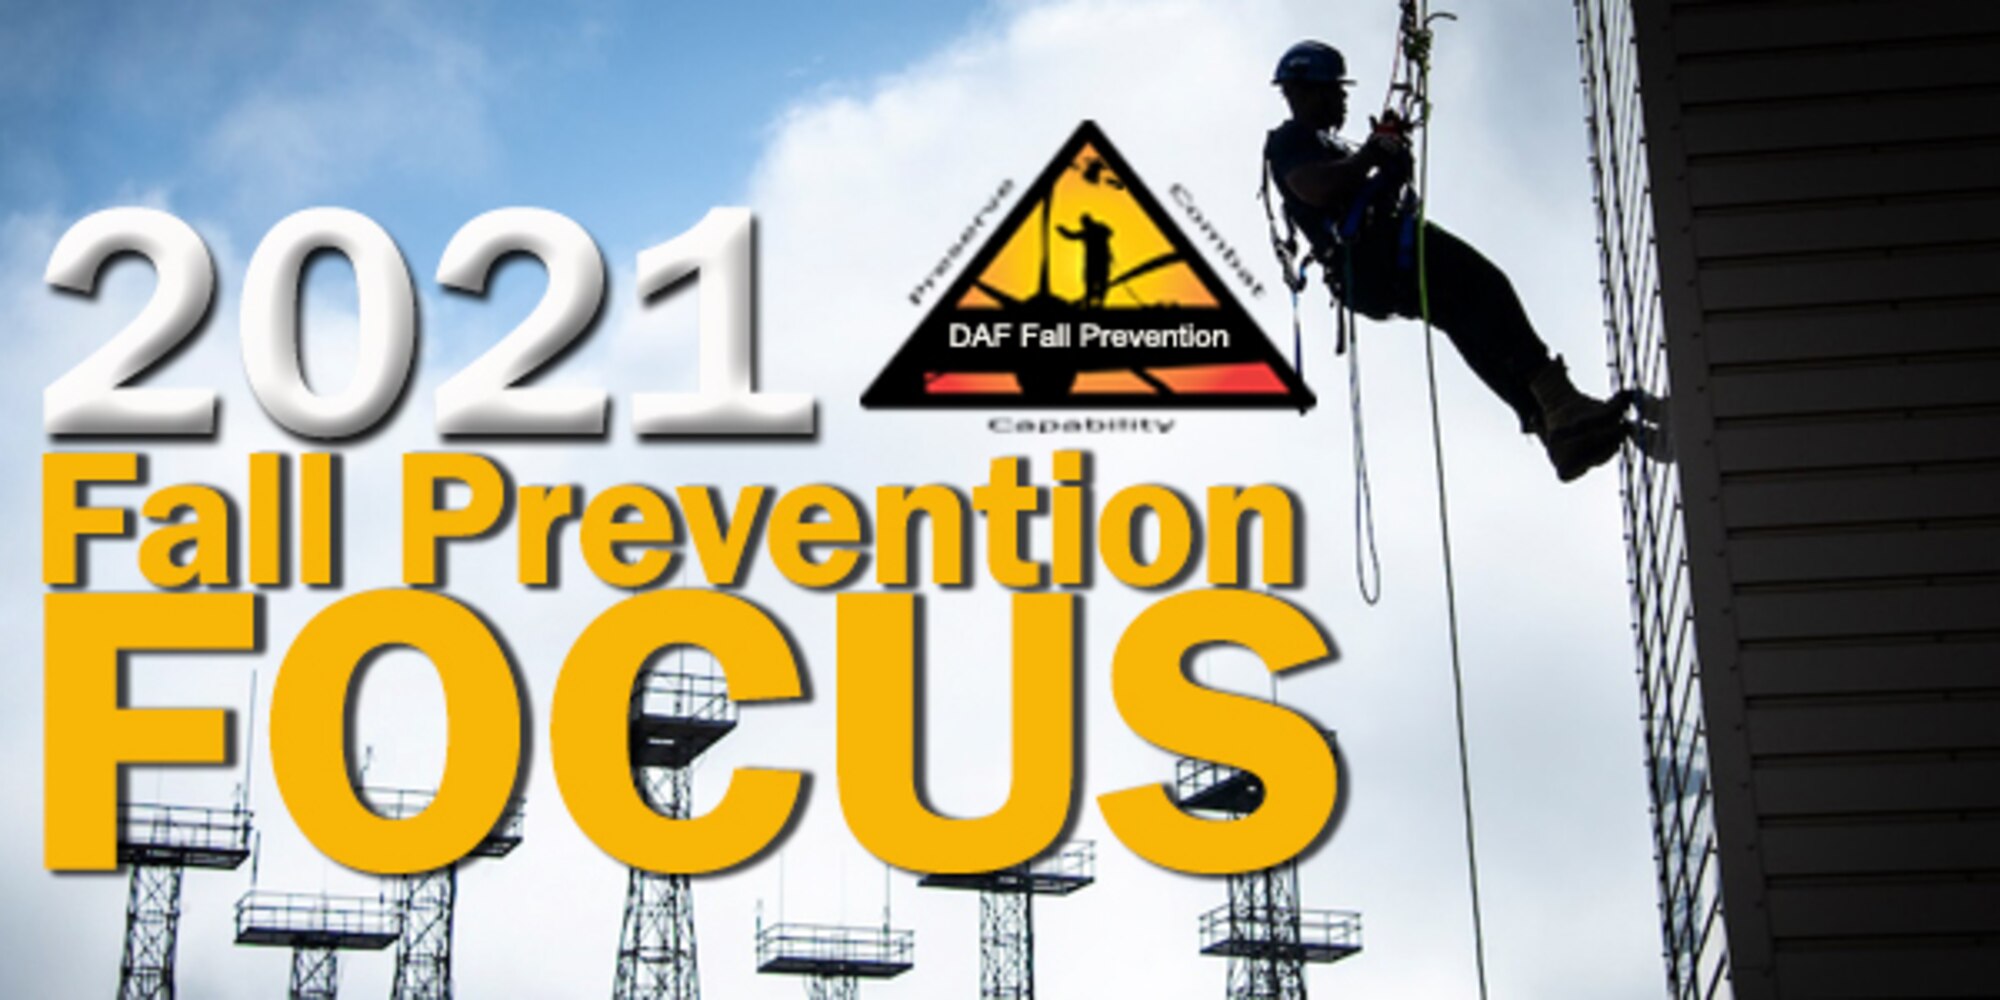 The Department of the Air Force is partnering for the eighth year with the Occupational Safety and Health Administration on the National Safety Stand-Down to prevent falls. The Fall Prevention Focus runs May 3-7, 2021.